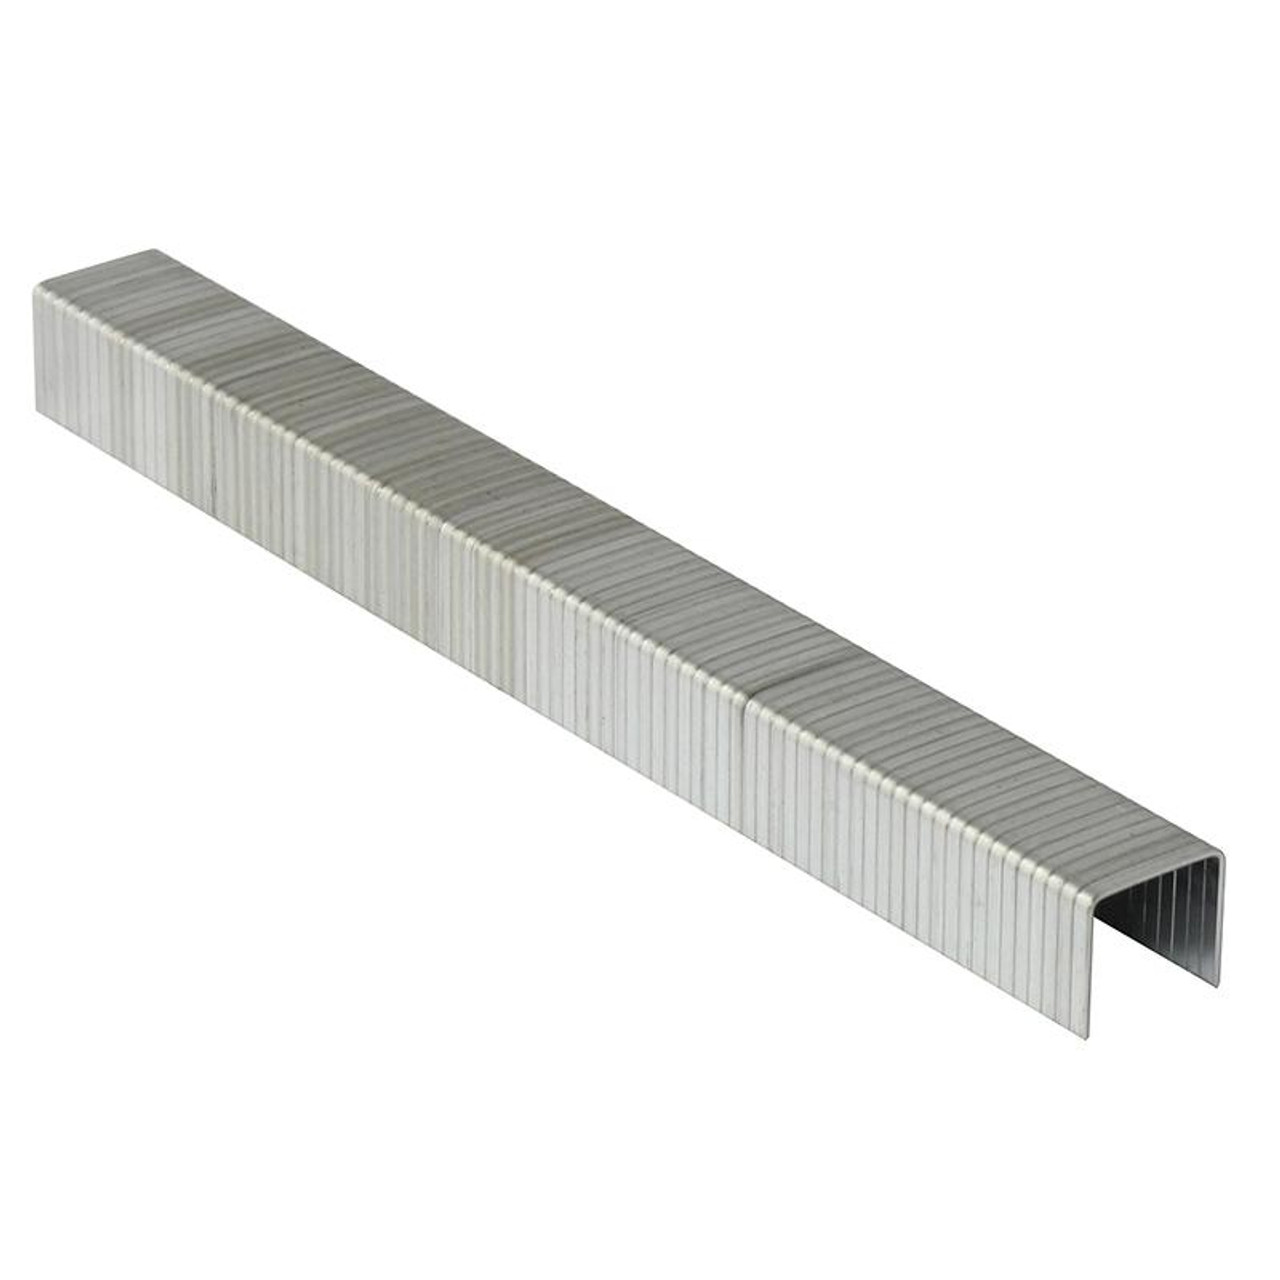 10Mm A11 Style Staples - Box 2000